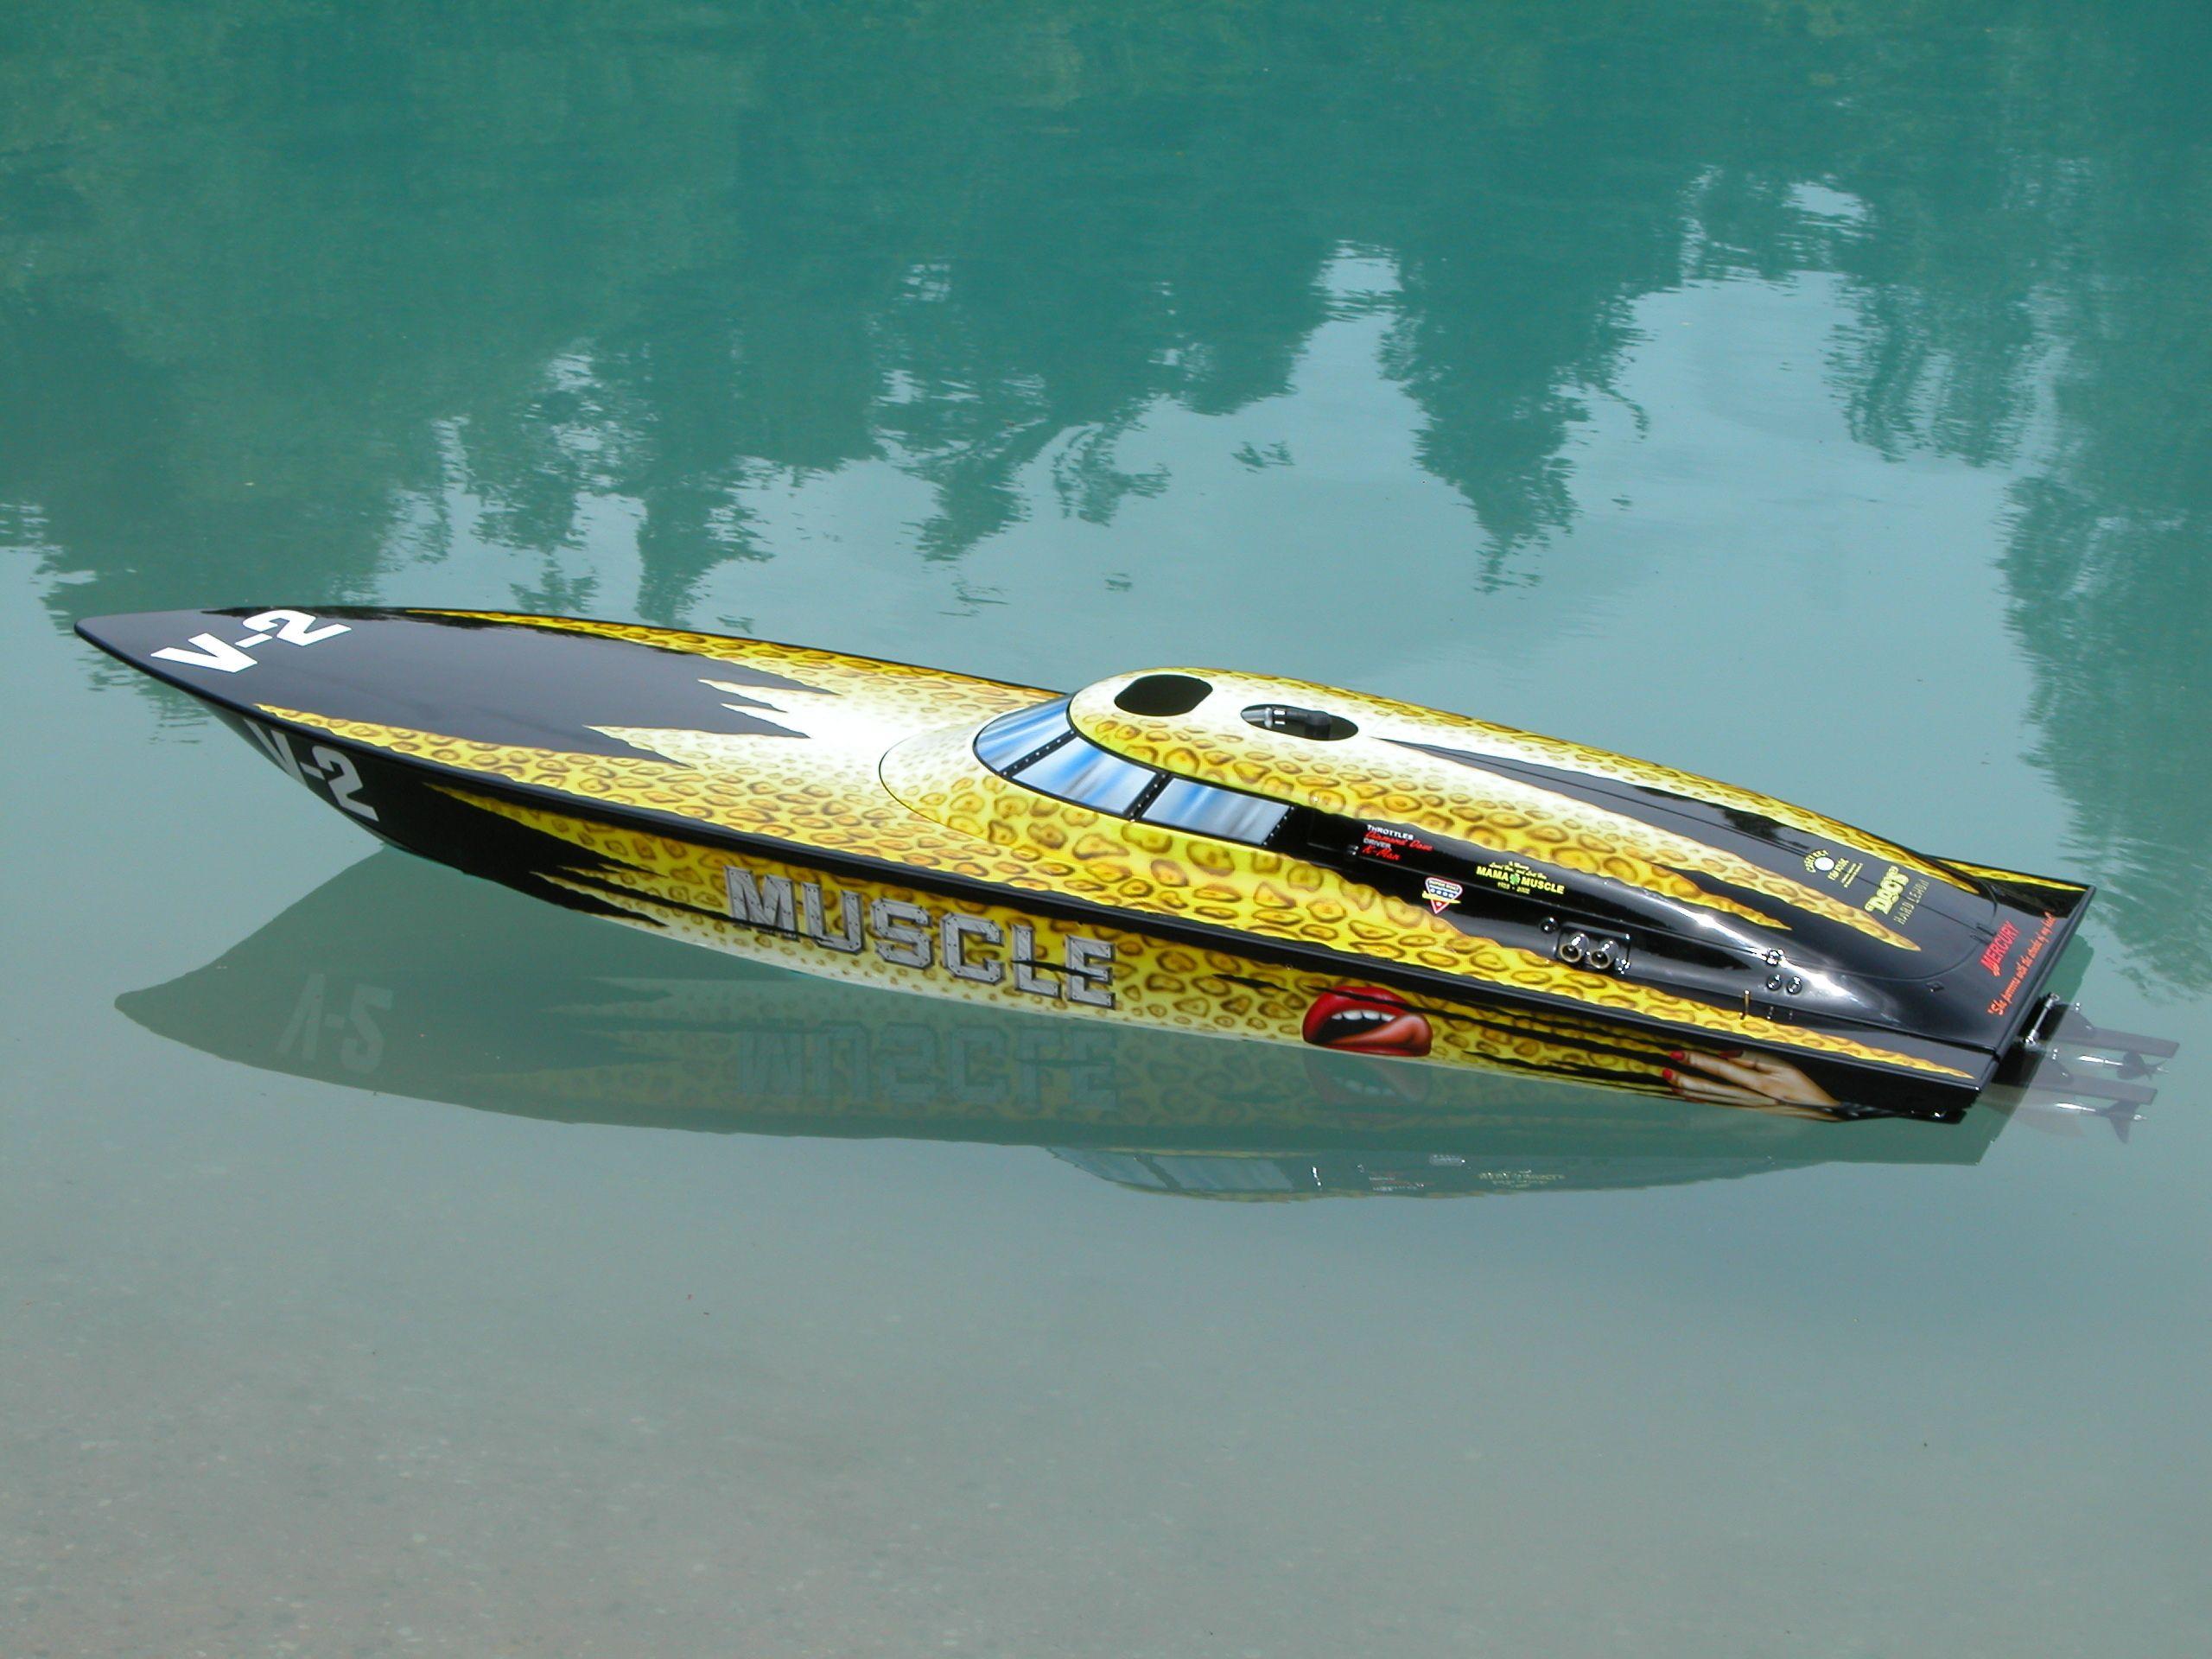 Pink Remote Control Boat: Breaking Gender Stereotypes: Women's Participation in RC Boat Racing